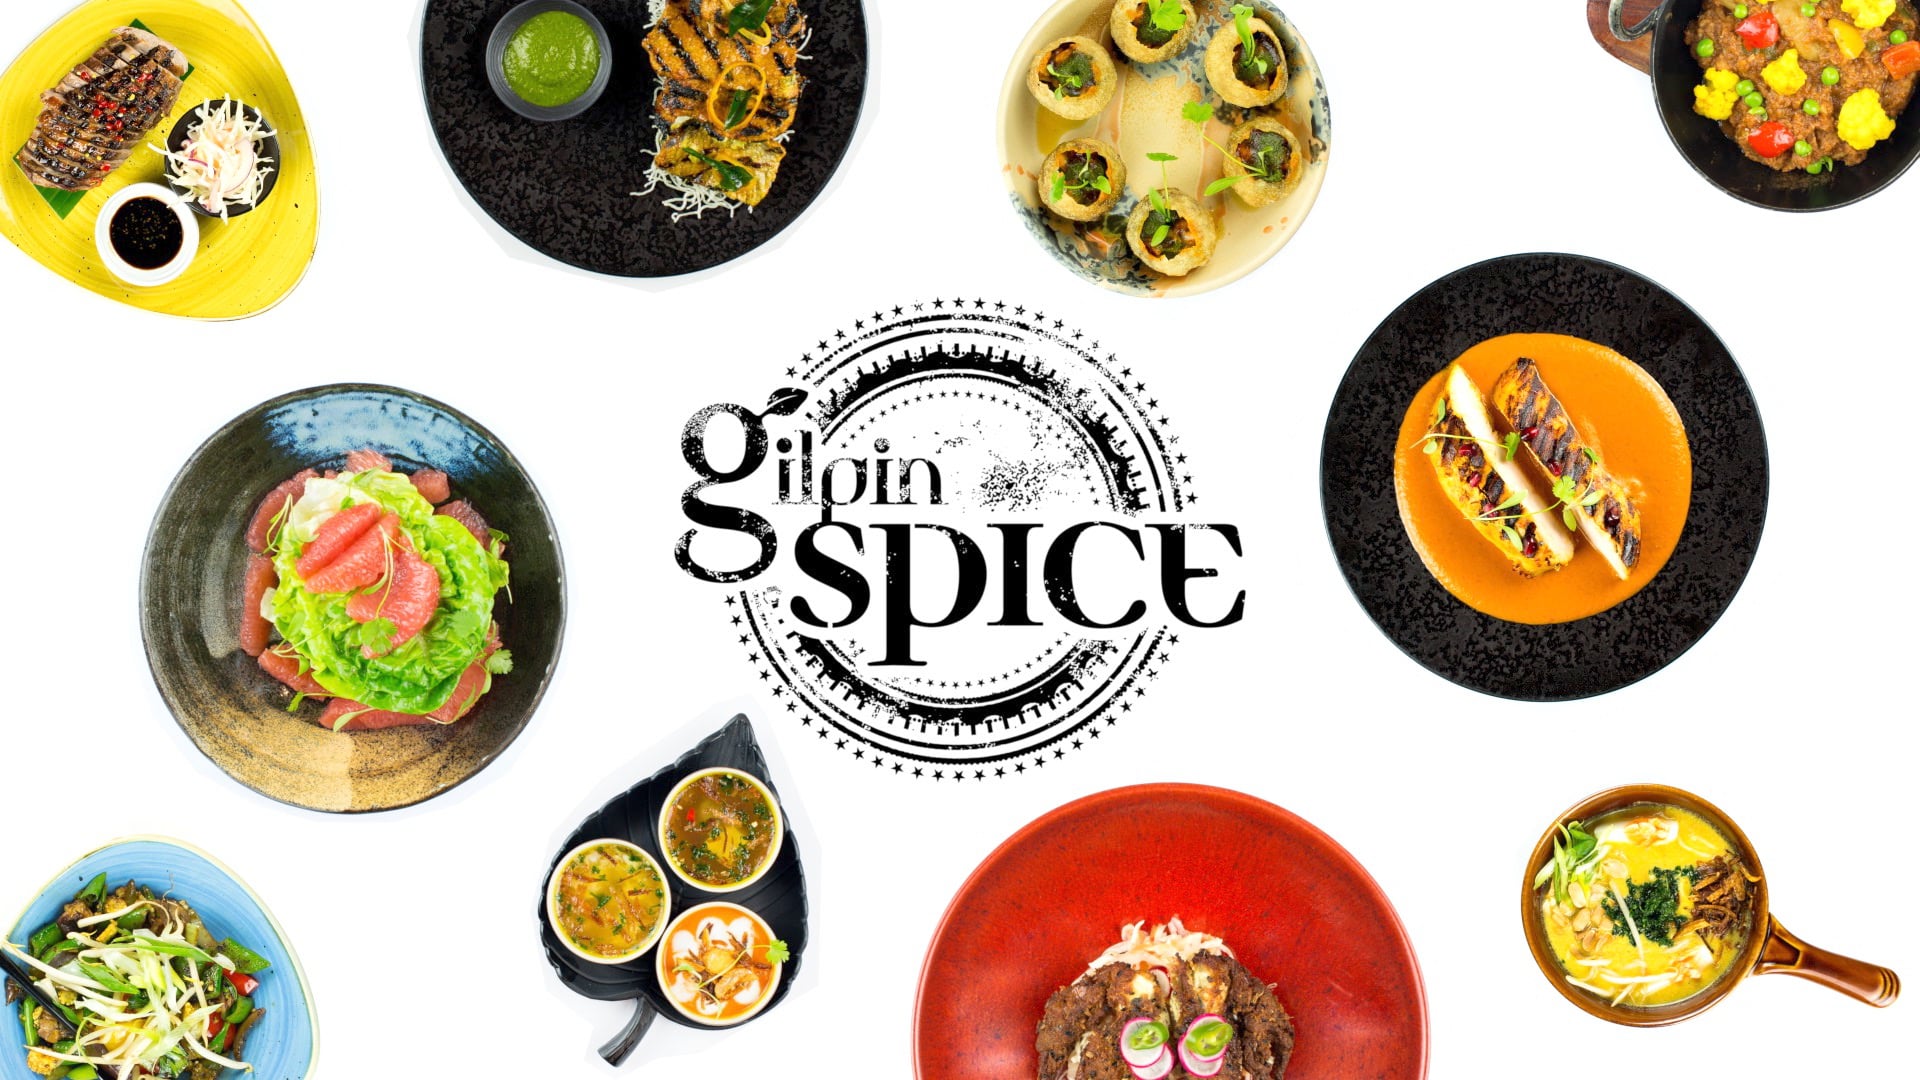 Gilpin Spice: Food